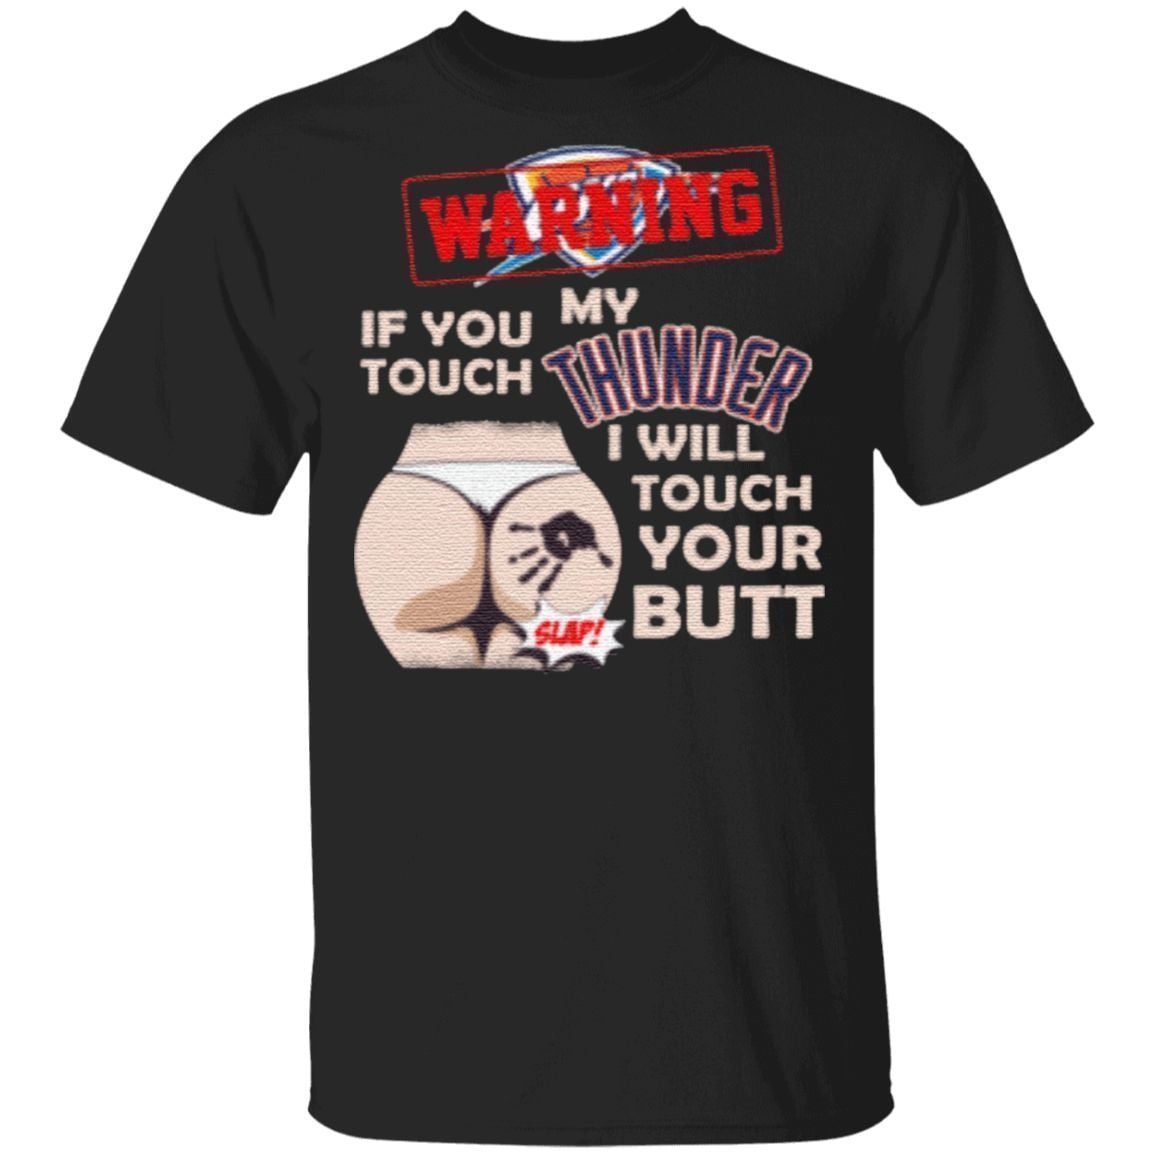 Oklahoma City Thunder NBA Basketball Warning If You Touch My Team I Will Touch My Butt T-Shirt